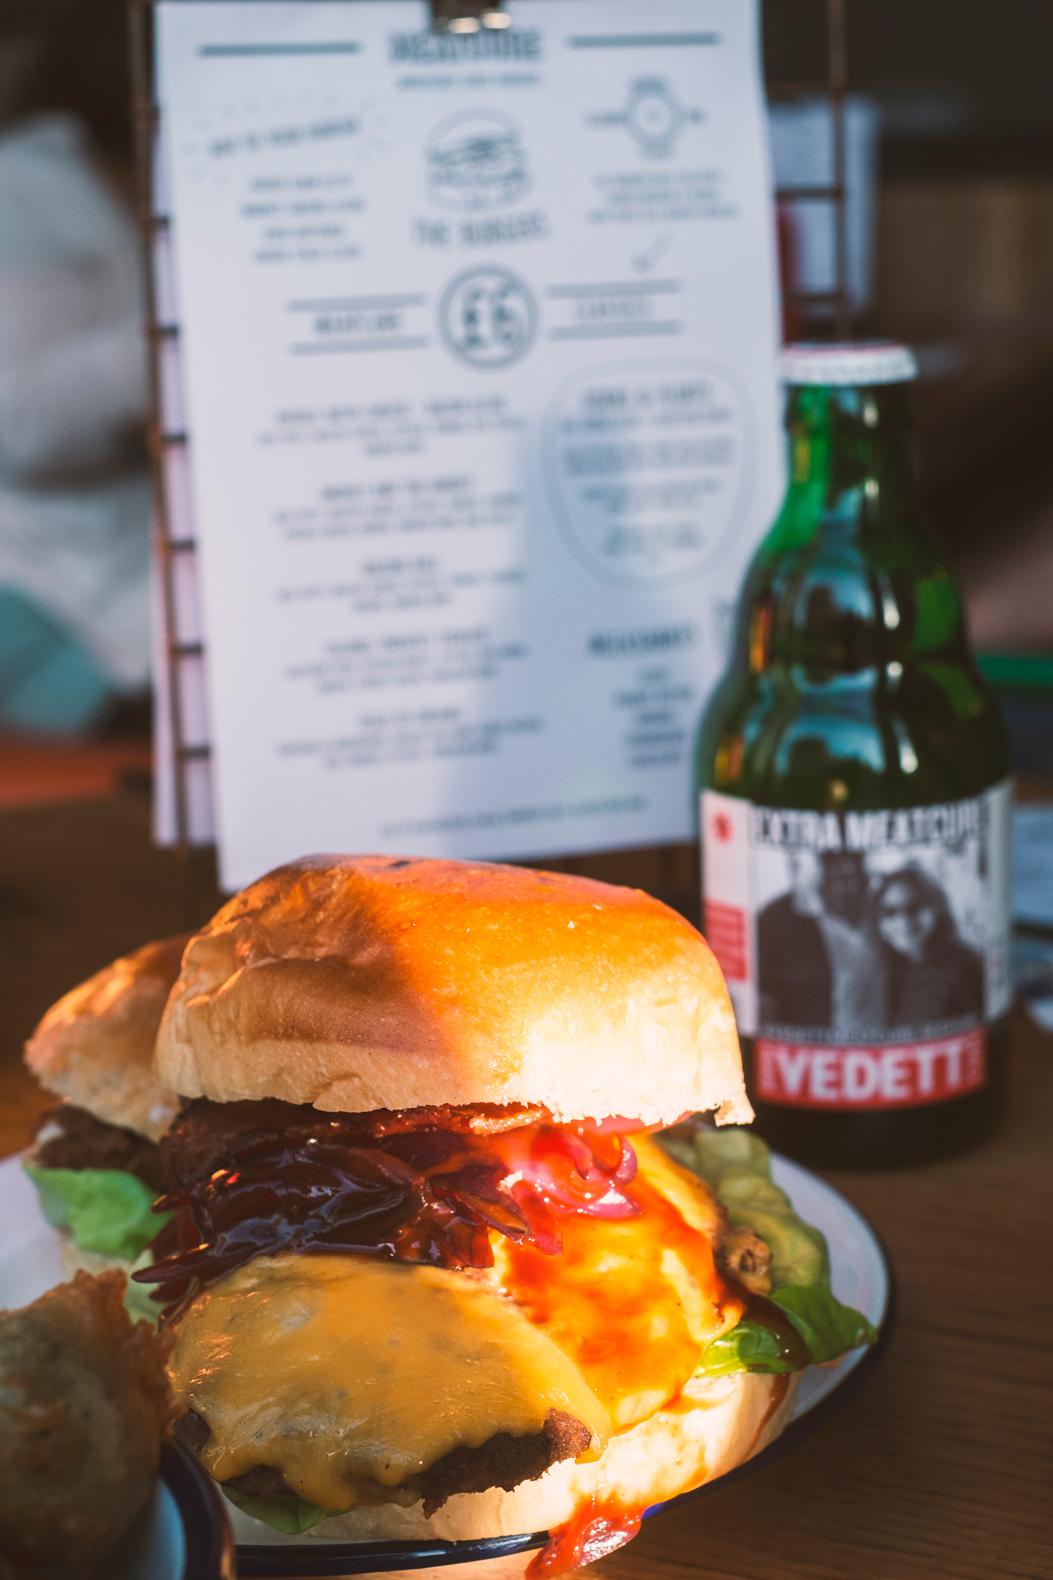 Going bonkers for burgers at Meatcure Bedford